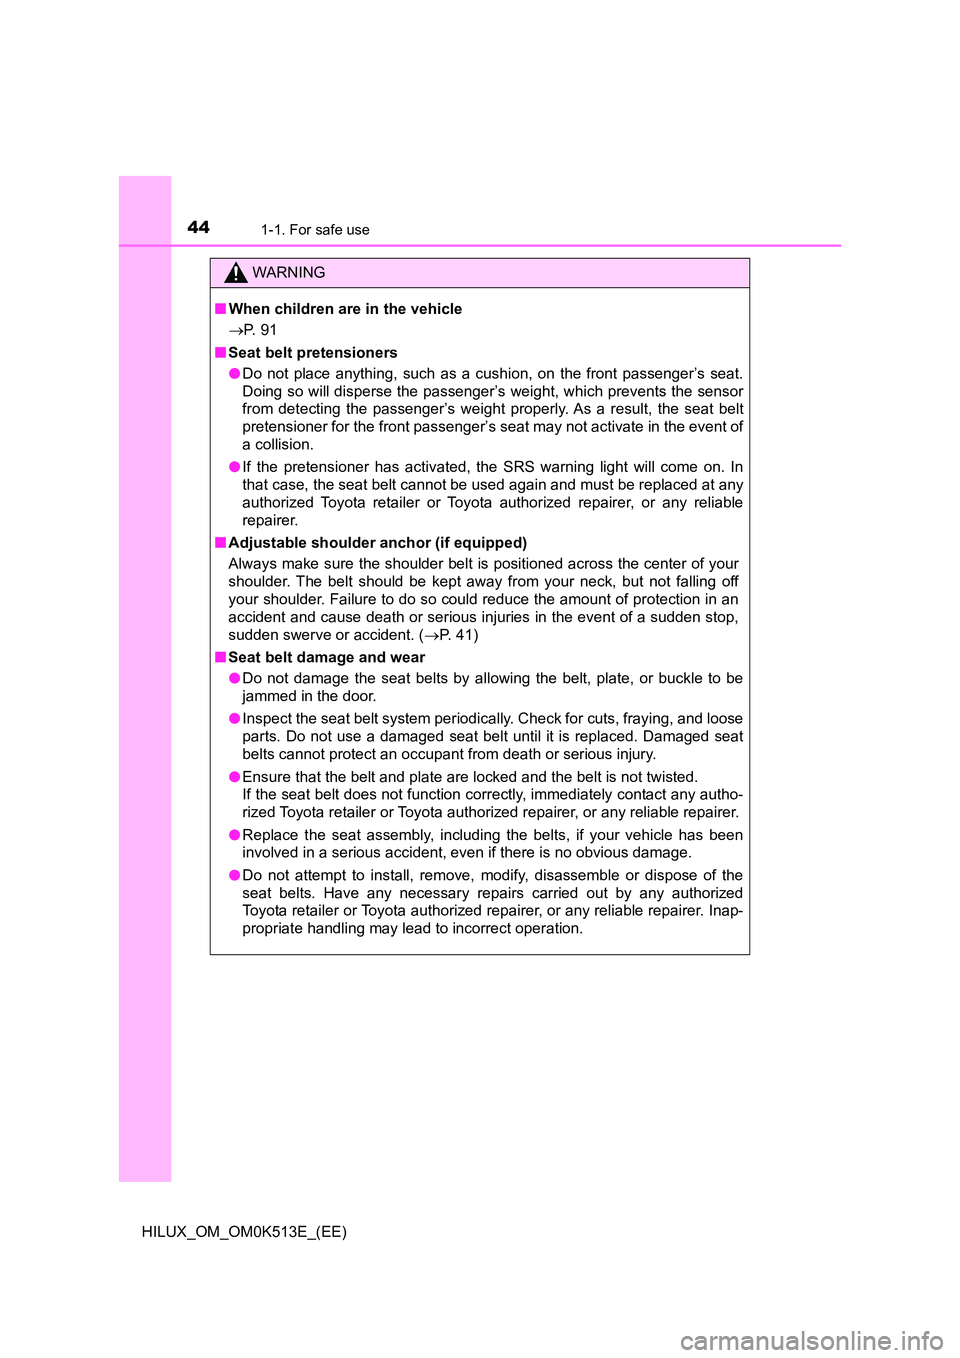 TOYOTA HILUX 2021  Owners Manual (in English) 441-1. For safe use
HILUX_OM_OM0K513E_(EE)
WARNING
�QWhen children are in the vehicle 
 P.  9 1 
�Q Seat belt pretensioners 
�O Do not place anything, such as a cushion, on the front passenger’s 